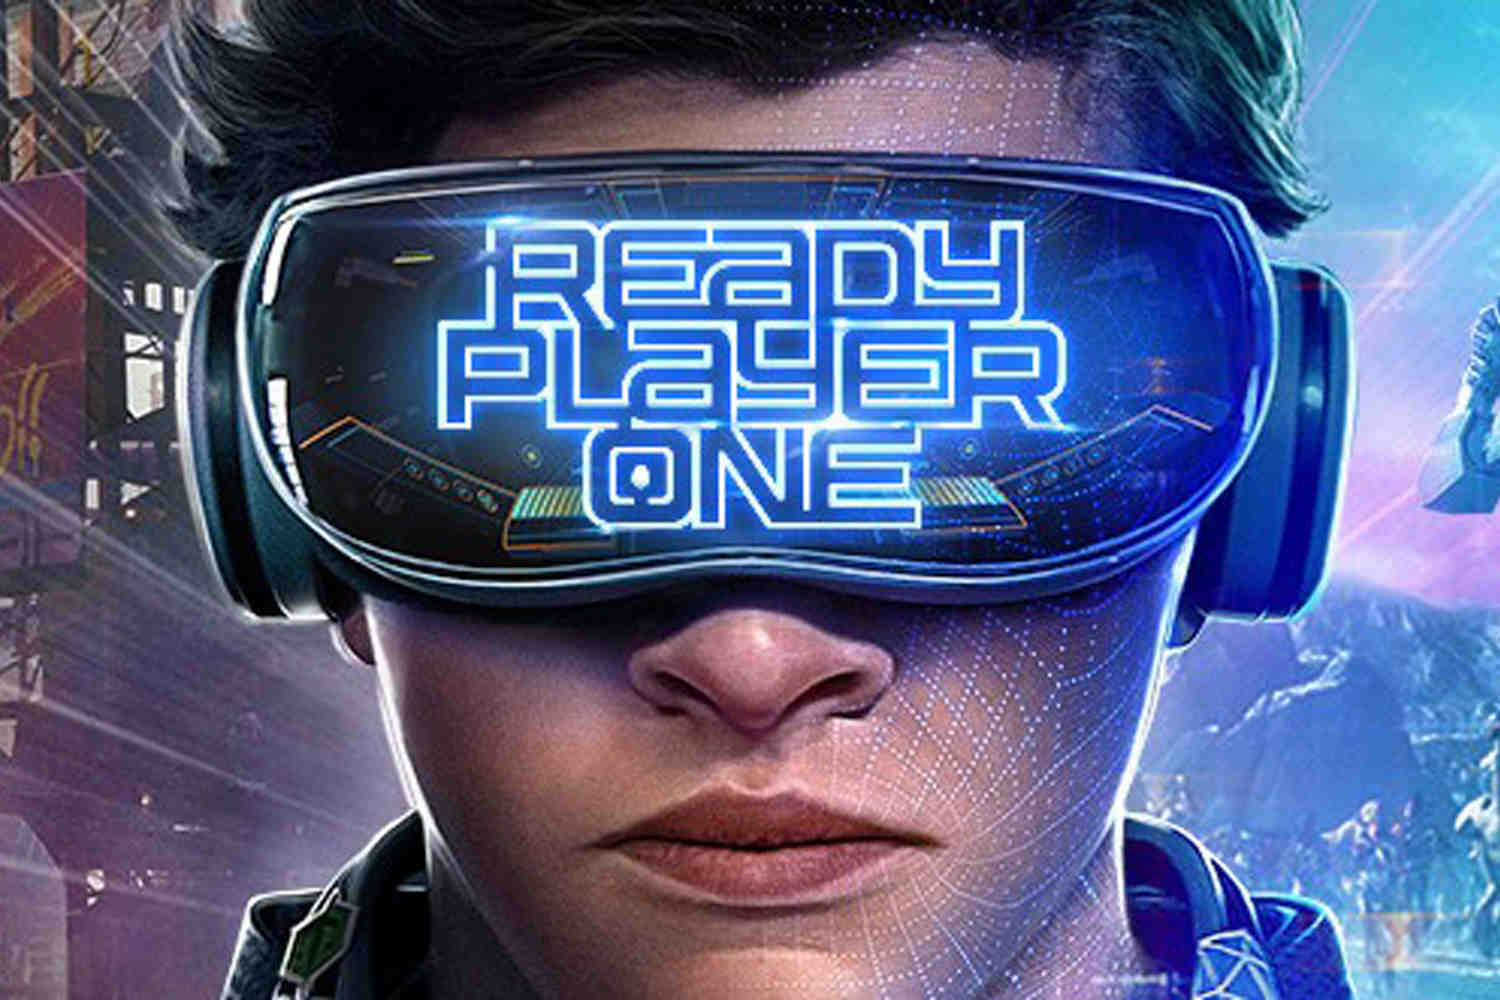 Tye Sheridan in a promotional poster for the movie Ready Player One